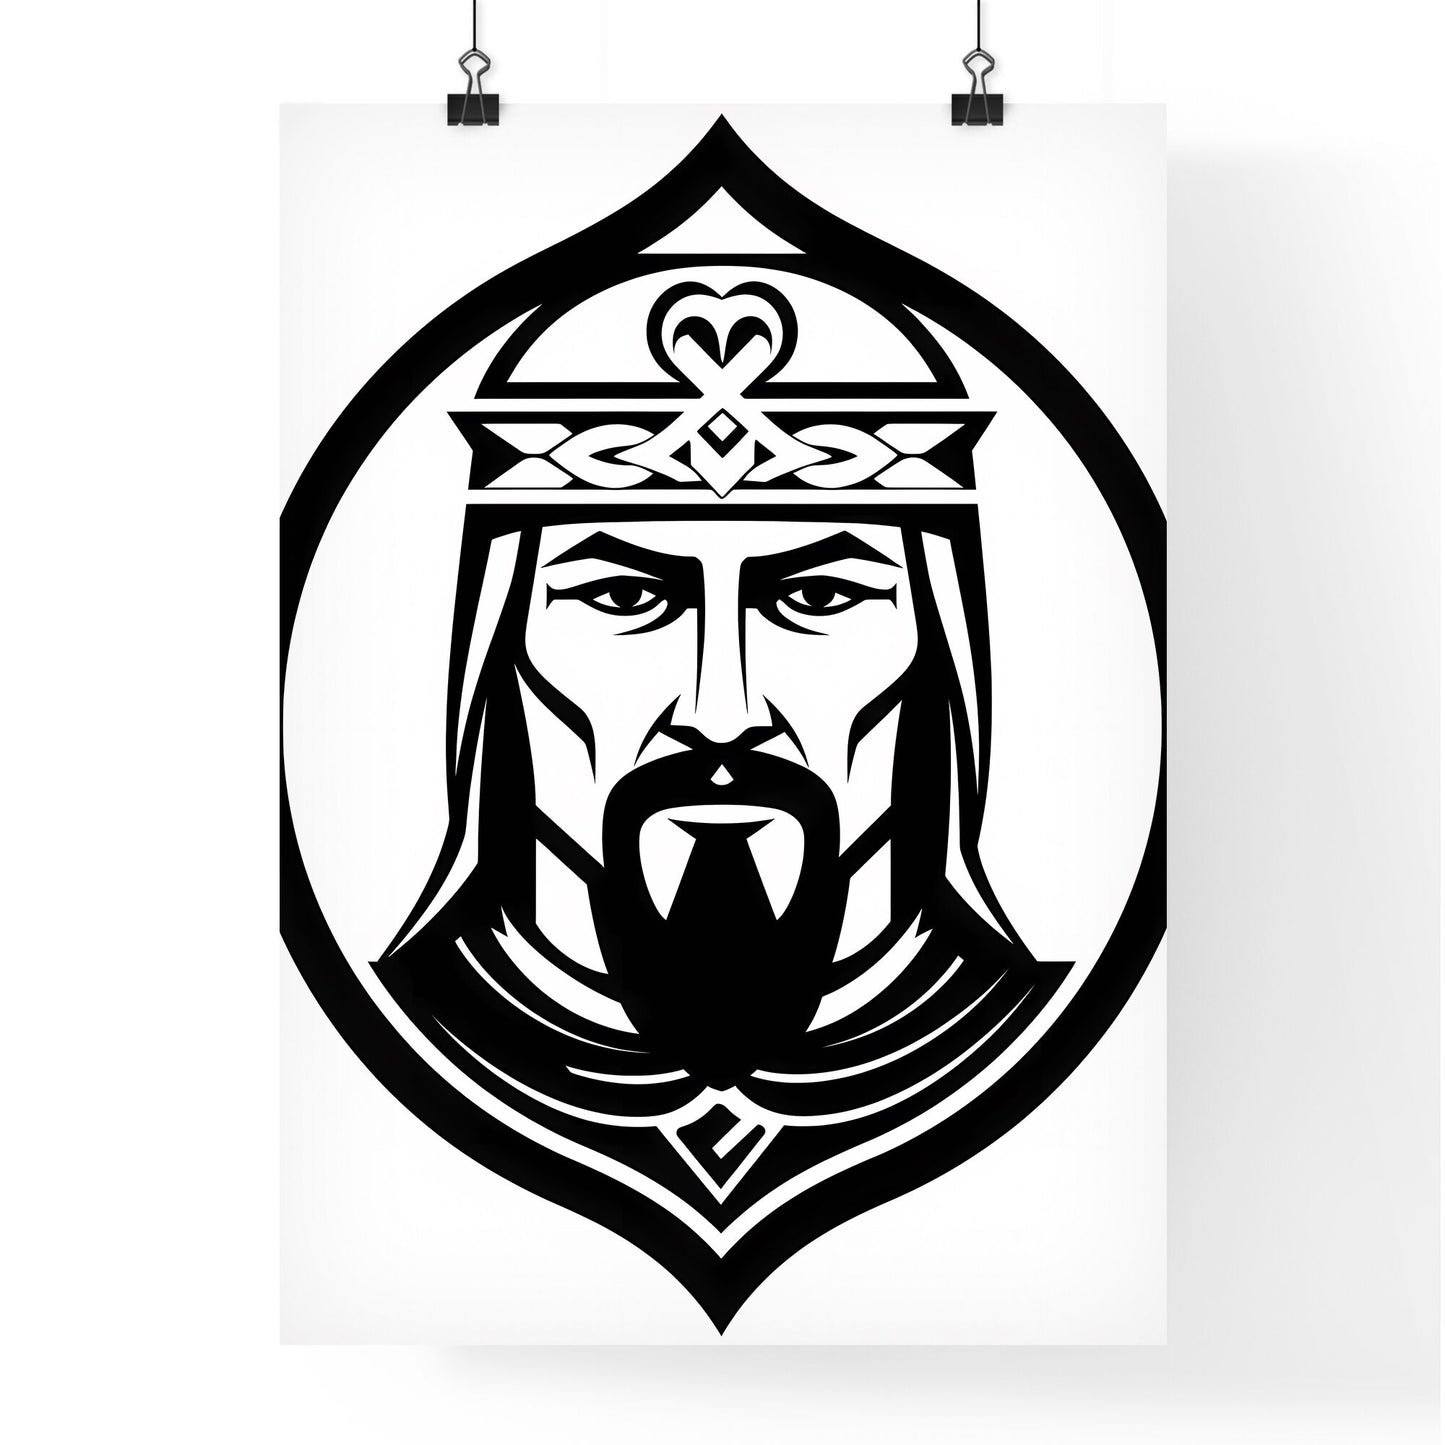 Vibrant Black and White Line Art King Mascot Logo with Beard and Crown Default Title